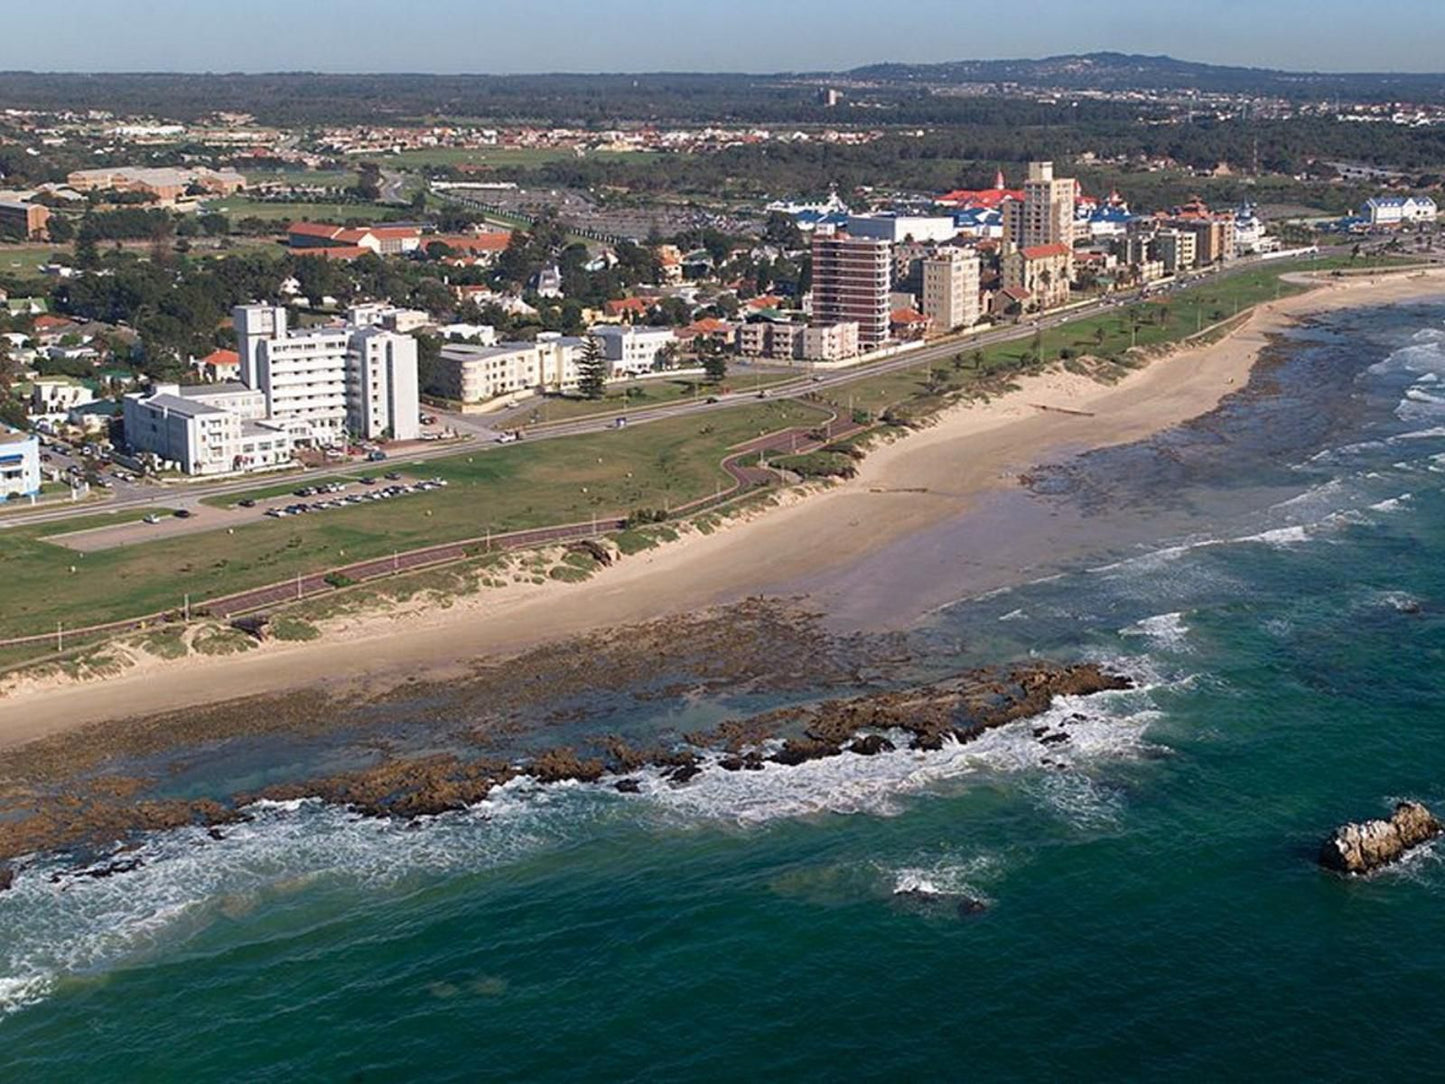 Sunset Events And Accommodation Summerstrand Port Elizabeth Eastern Cape South Africa Beach, Nature, Sand, Tower, Building, Architecture, Aerial Photography